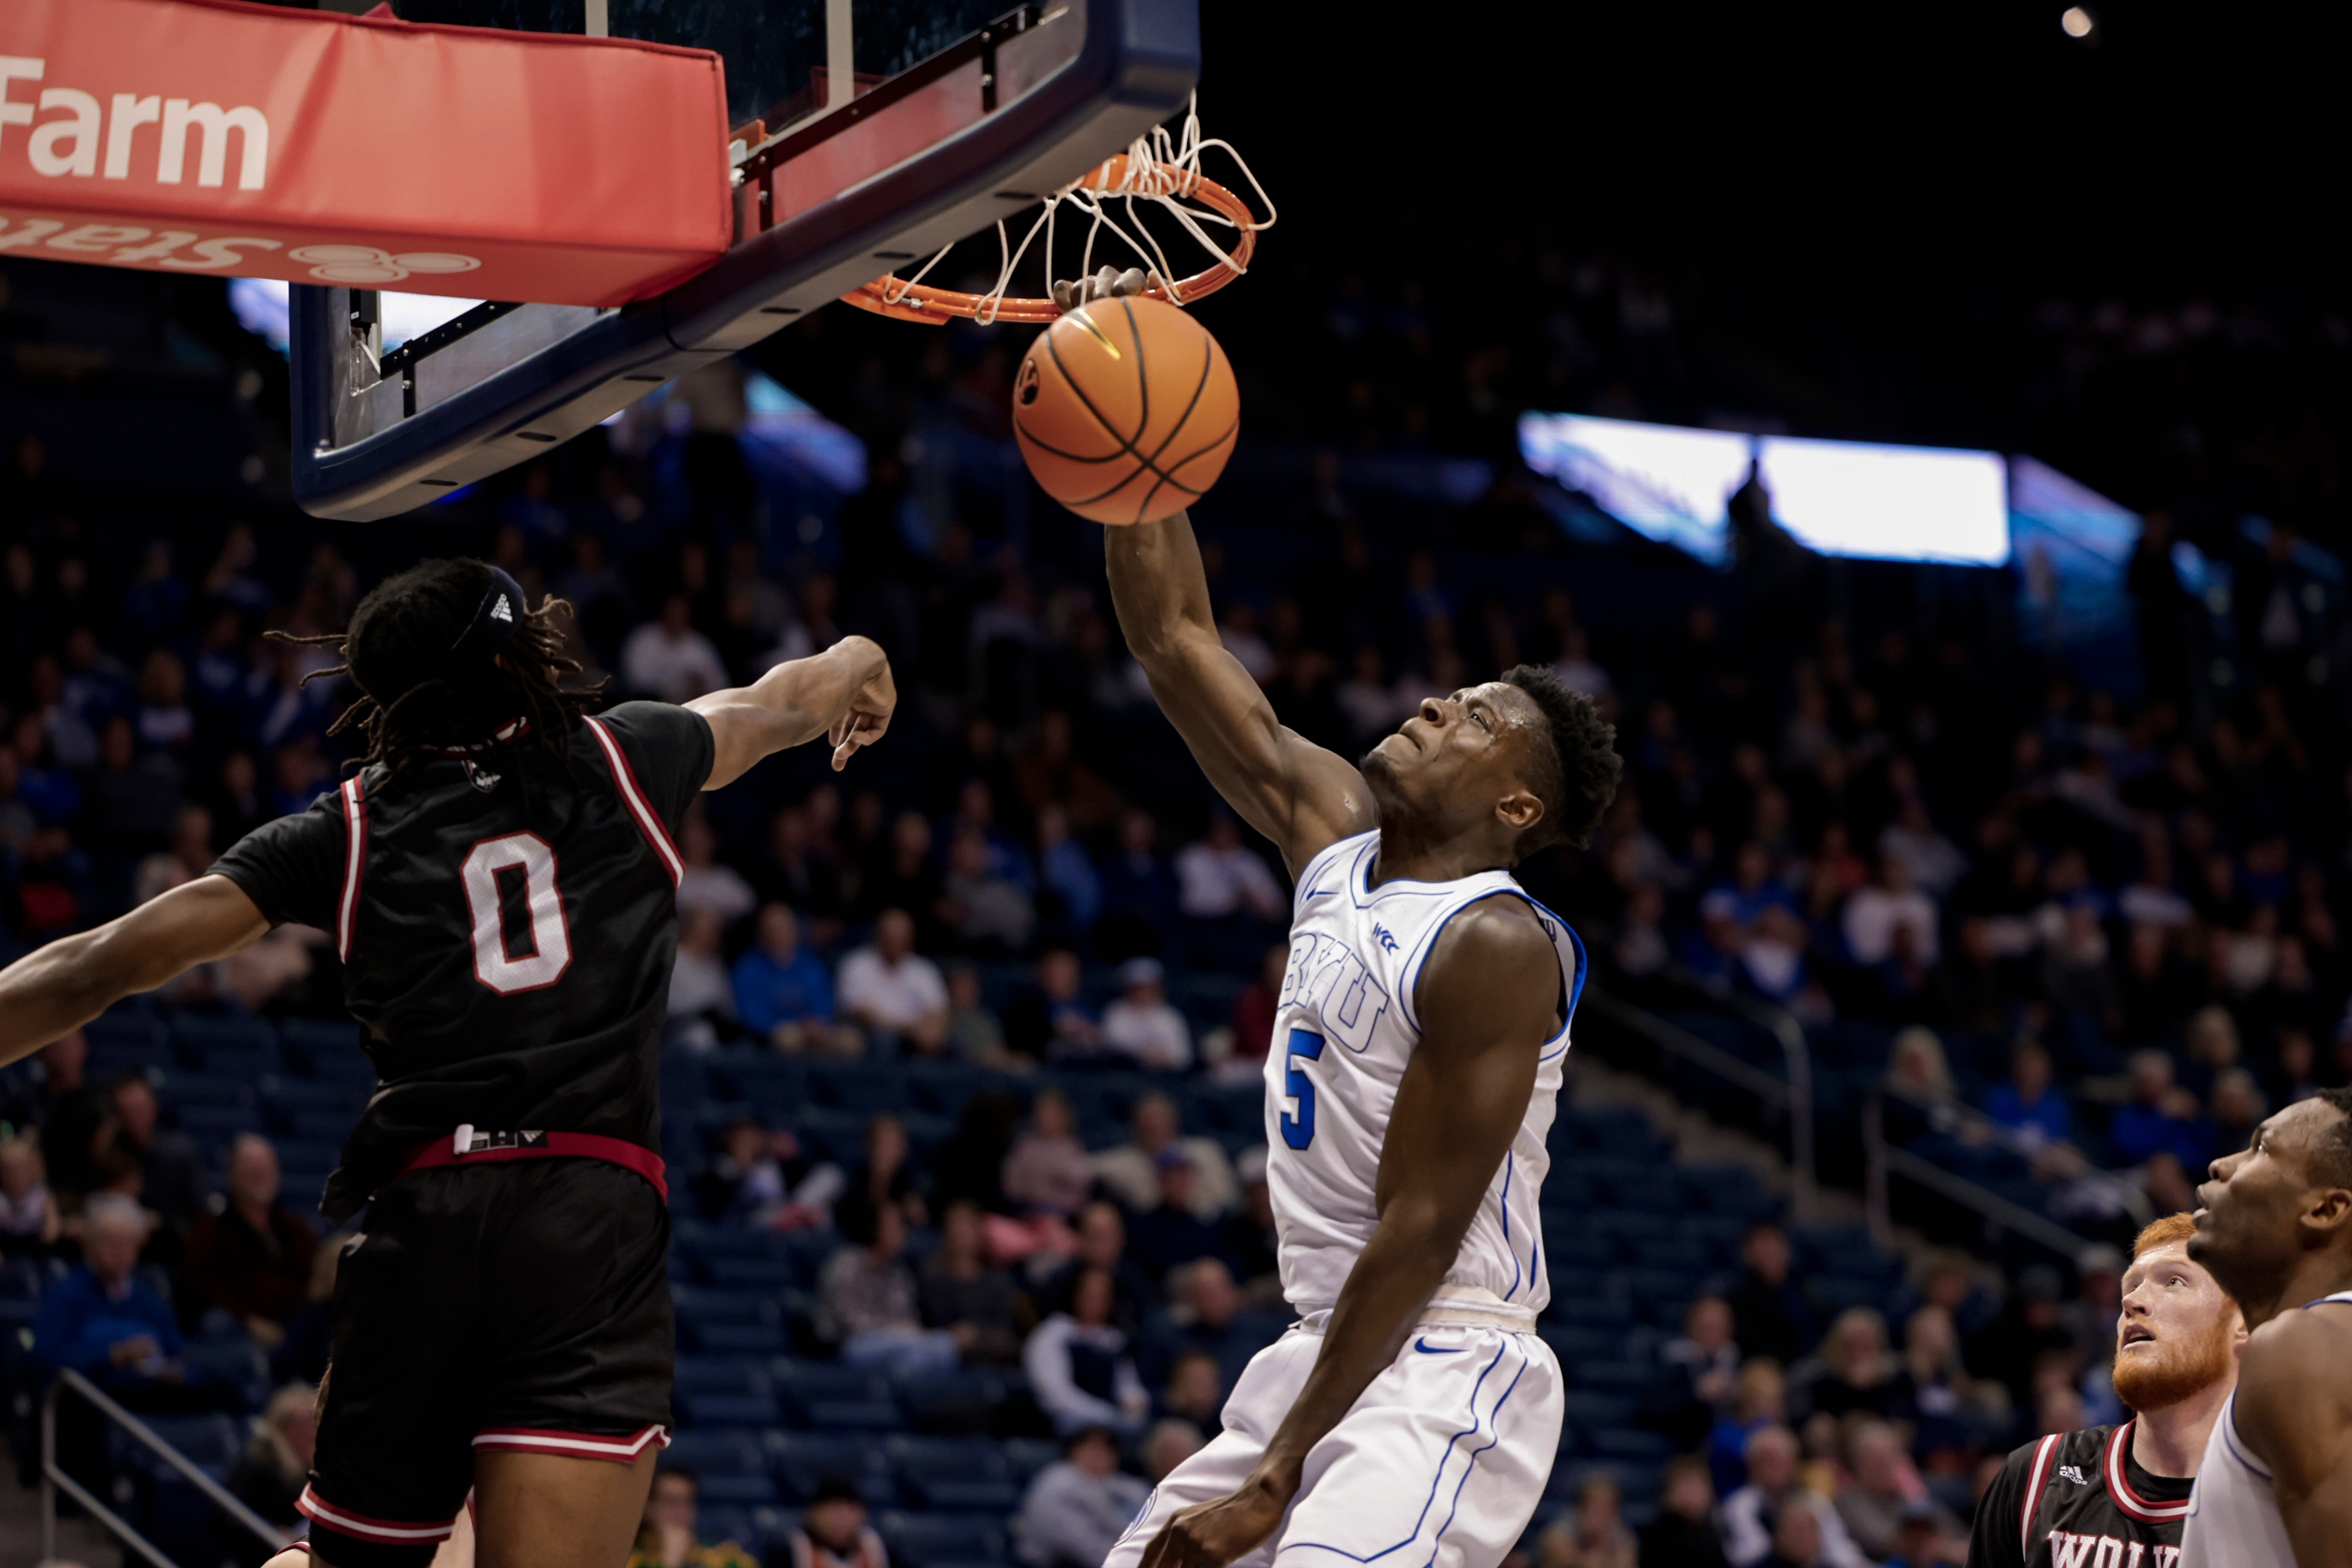 Gideon George throws down a tomahawk jam during a game against Western Oregon at the Marriott Center.